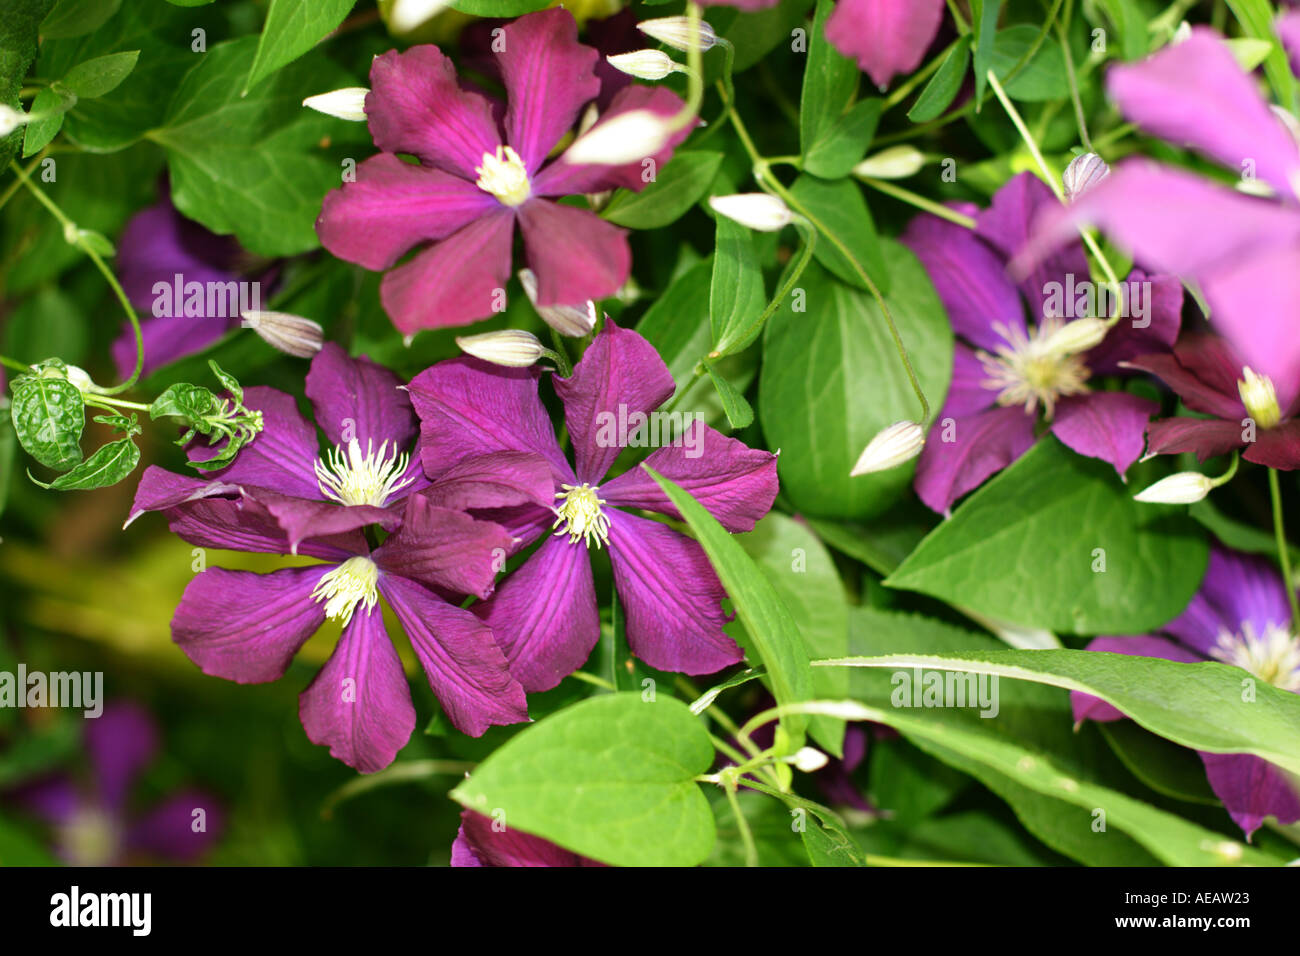 clematis flowers Stock Photo